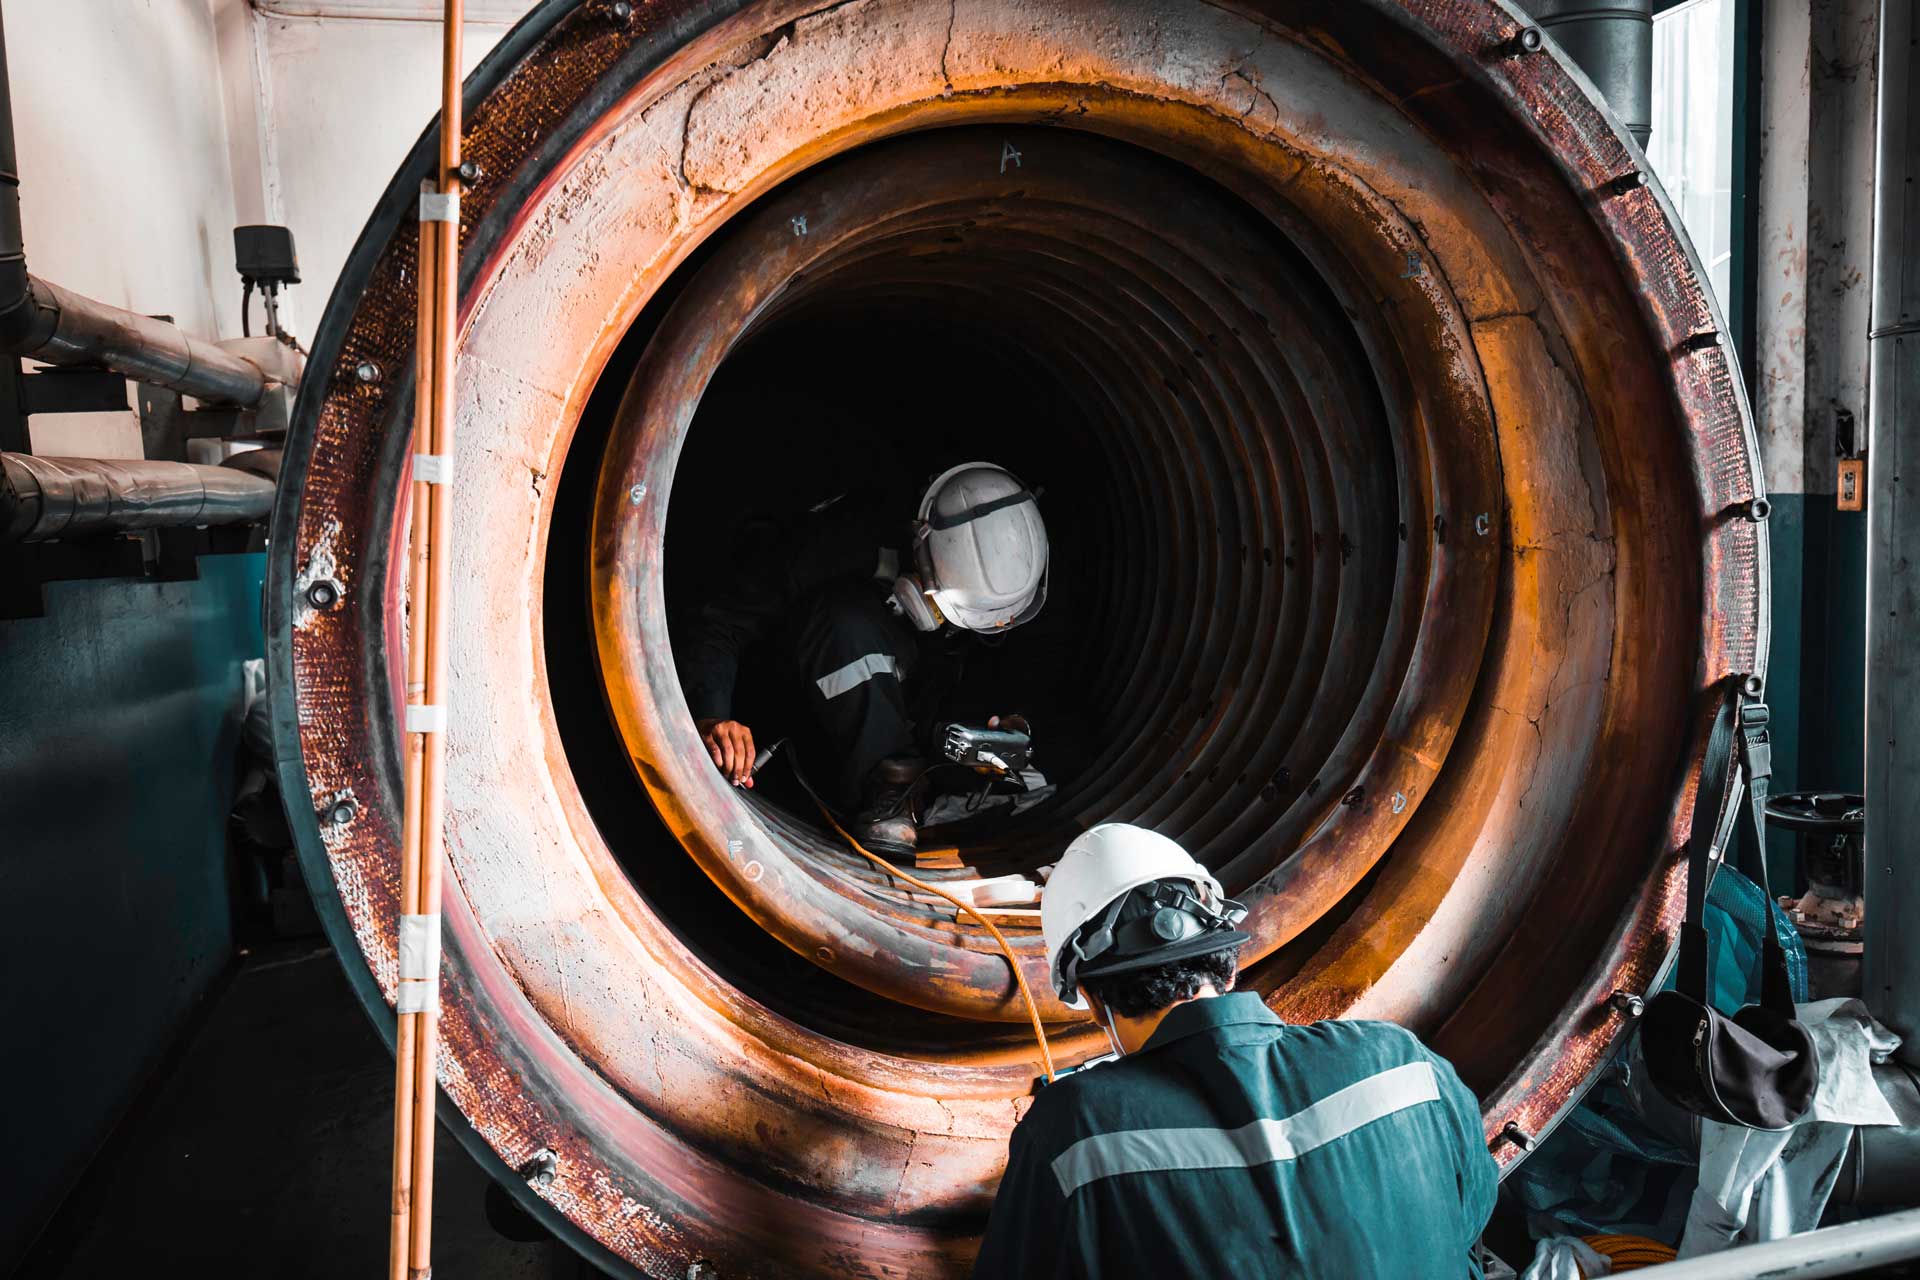 Male two worker inspection measured the coil pipe circular thickness of the boiler scan minimum thickness into danger confined space.